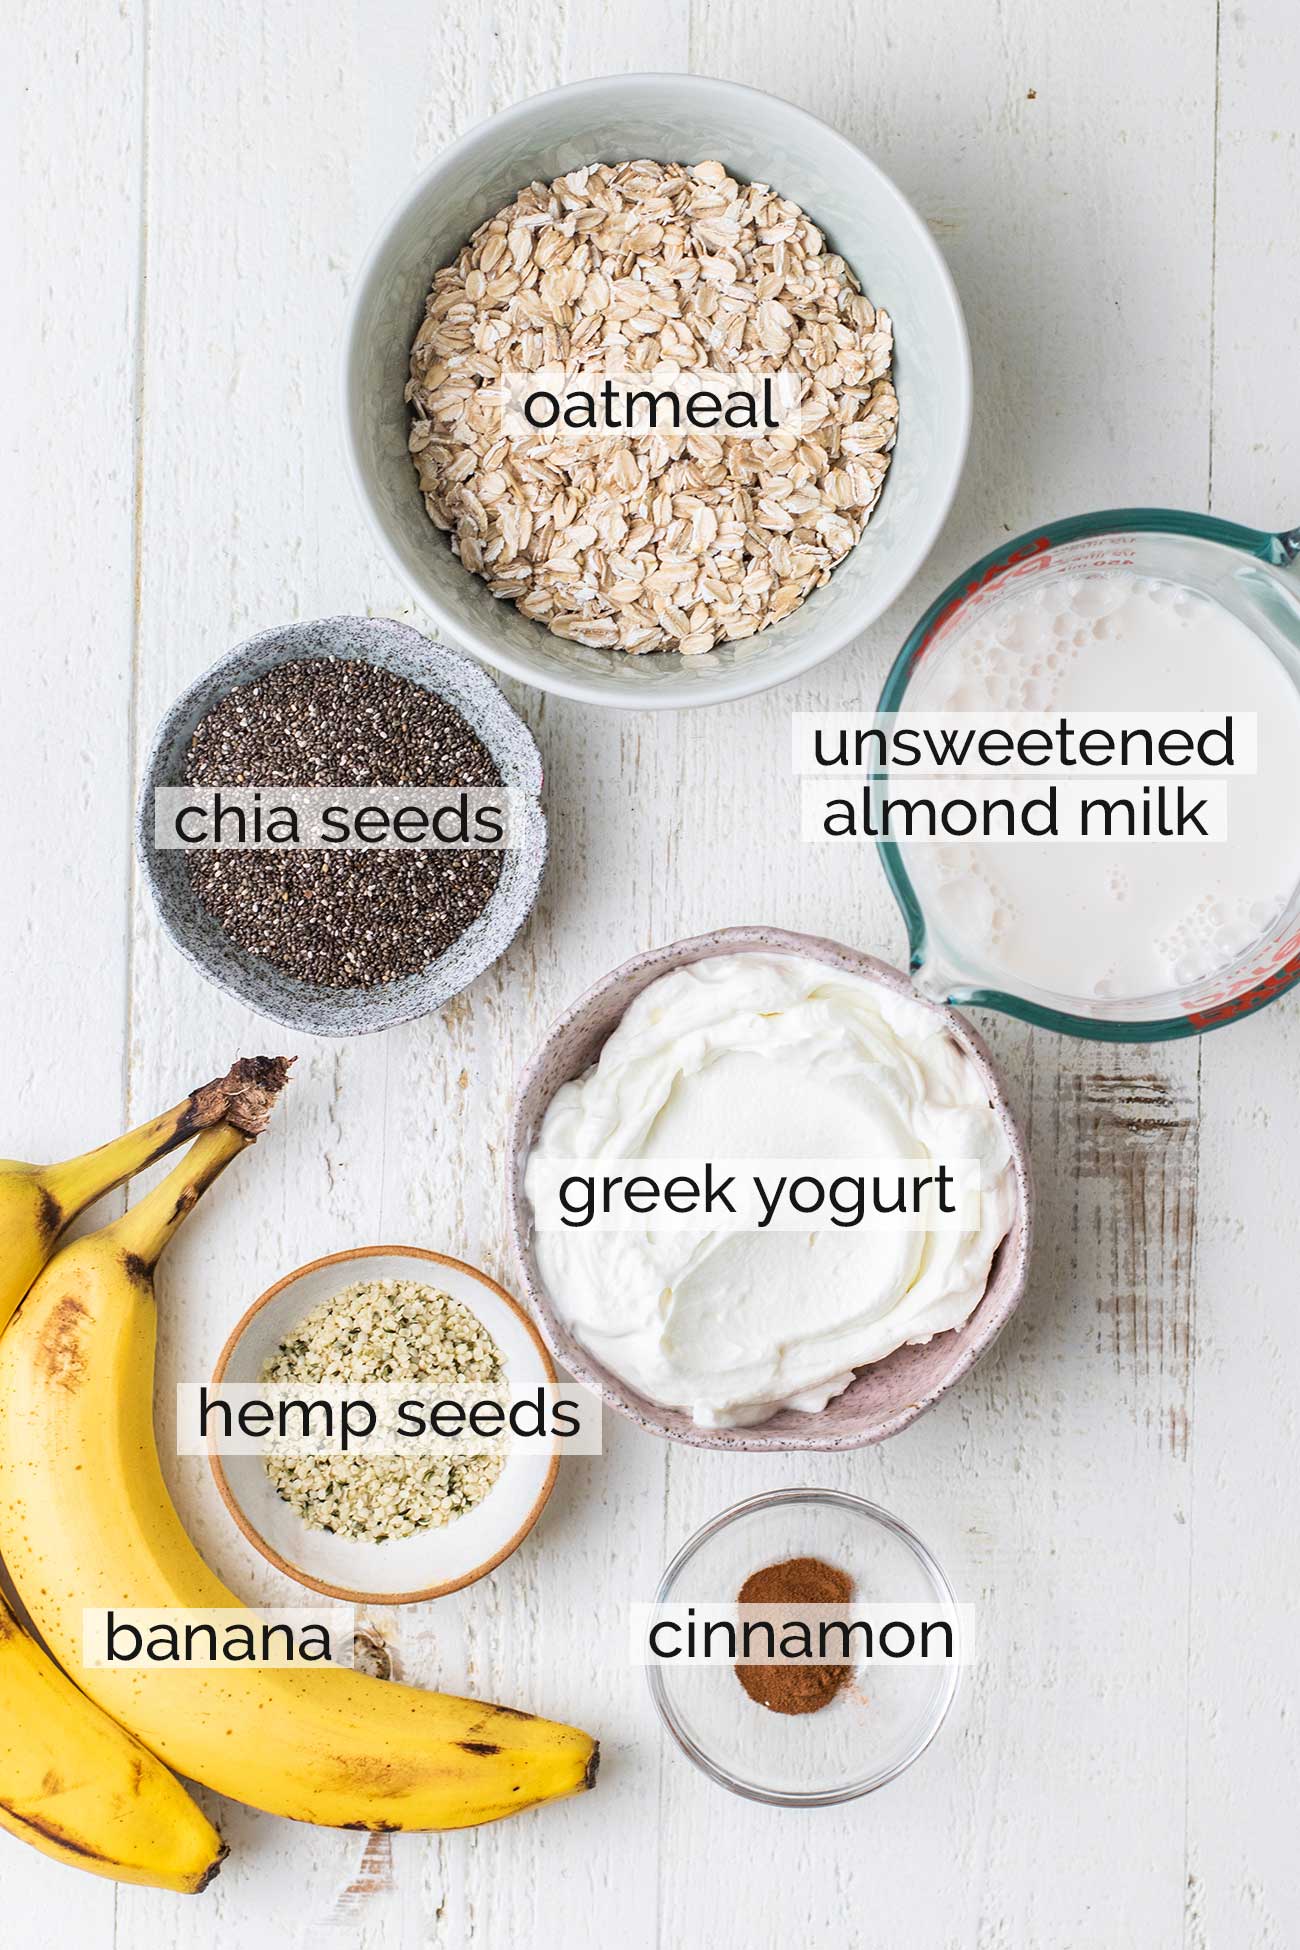 The ingredients needed to make a healthy overnight oats with greek yogurt.